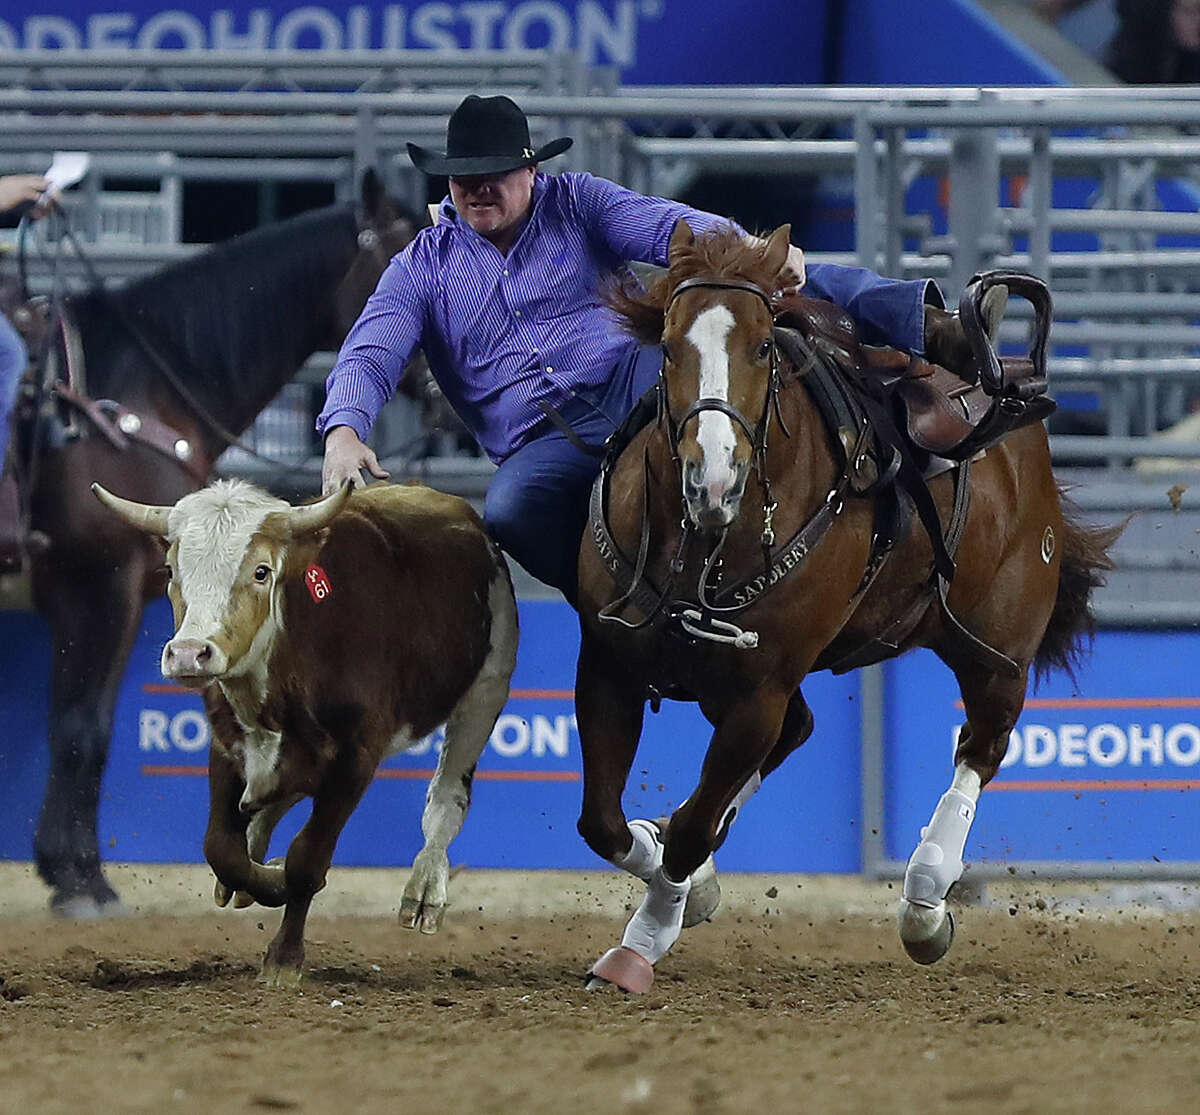 Stockton Graves jumps off his horse onto a steer during the Steer Wrestling competition at the Houston Livestock Show and Rodeo at NRG Stadium, Saturday, March 10, 2018, in Houston. ( Karen Warren / Houston Chronicle )